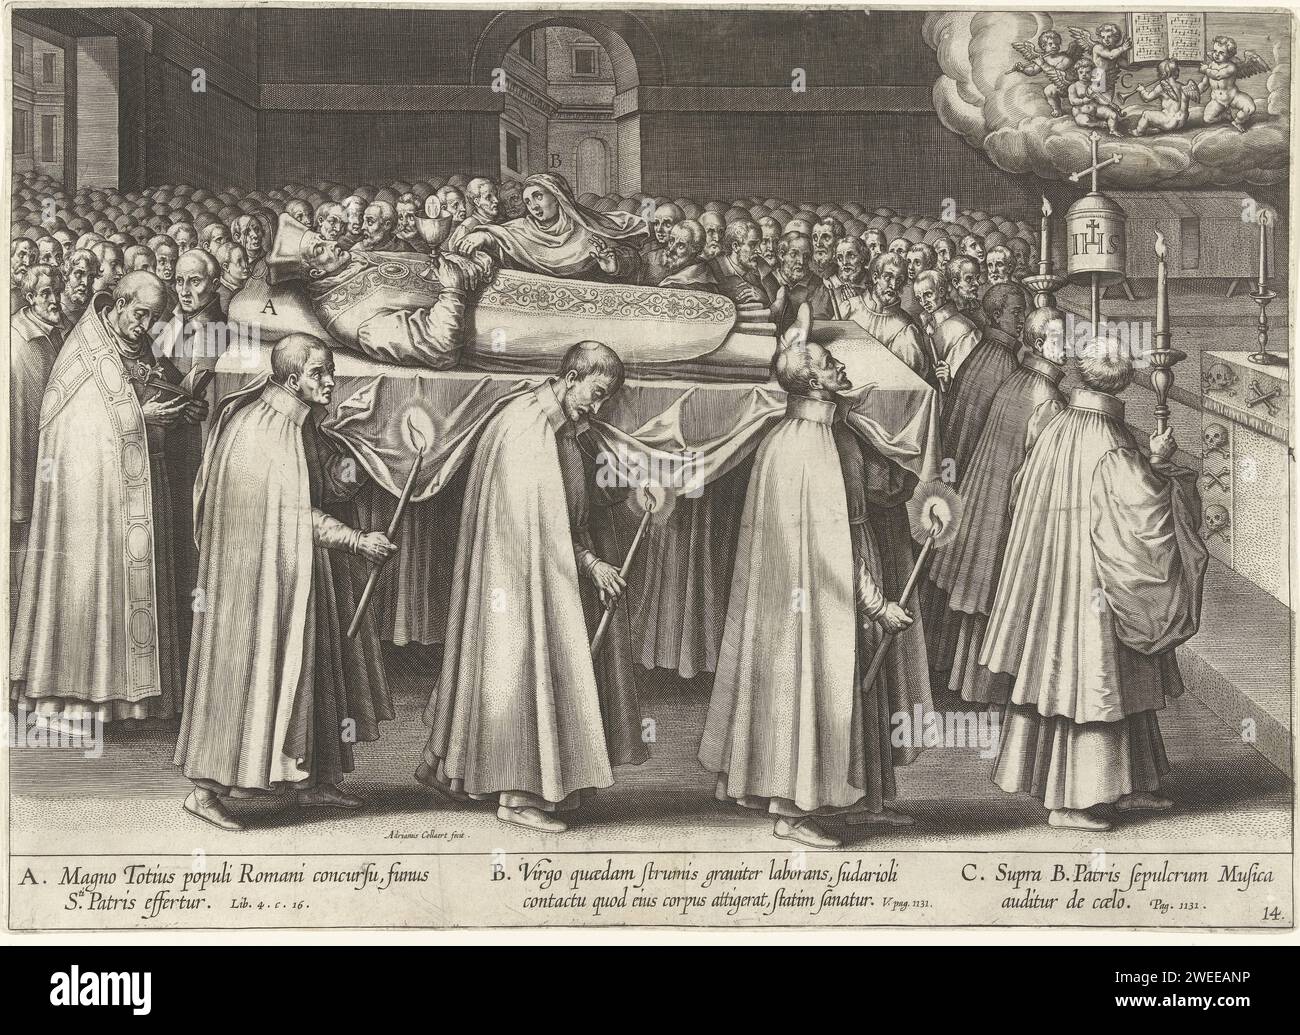 Funeral of Ignatius, Adriaen Collaert, After Juan de Mesa, 1610 print Three scenes from the life of Ignatius of Loyola. Central the funeral of Loyola. A mass collects around the corpse. A woman touches the corpse of the saint and is healed. In the upper right corner, some angels make music above the grave of Ignatius. The print has Latin captions with references to the scenes in the print. The print is part of a fifteen -part series about the life of Ignatius of Loyola. print maker: Antwerpafter painting by: Madridpublisher: Antwerp paper engraving post-mortem occurrences  St. Ignatius - find Stock Photo